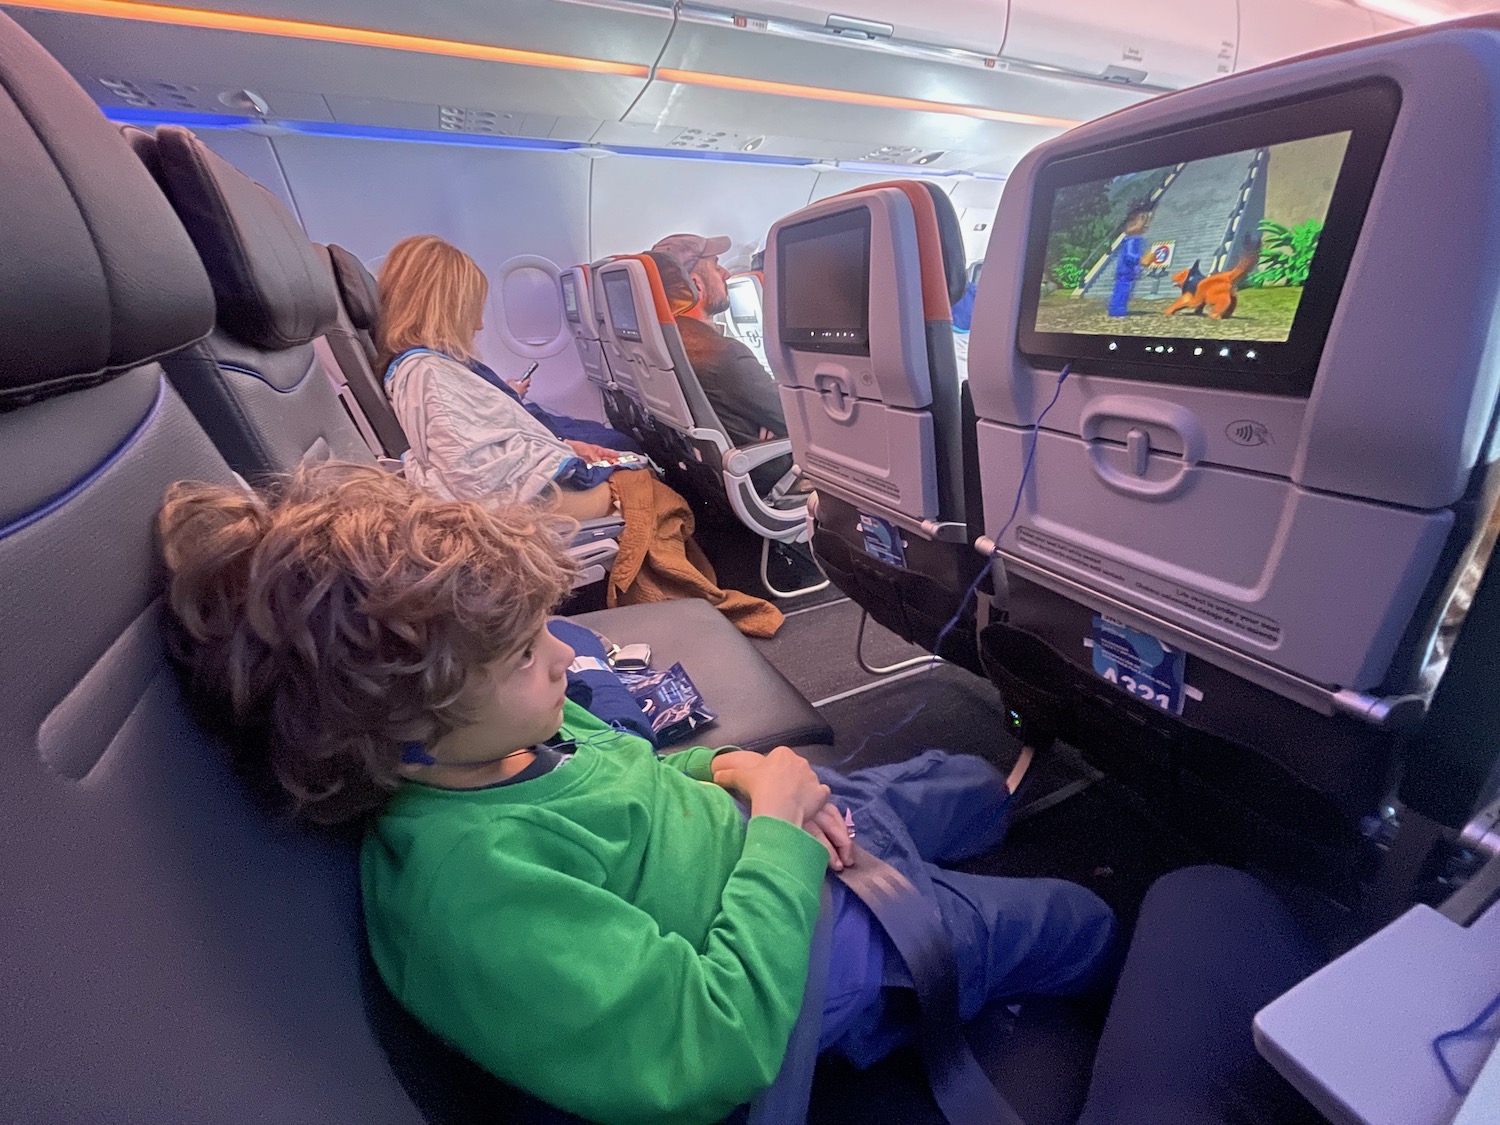 a child sitting in a seat with a television on the back of the seat